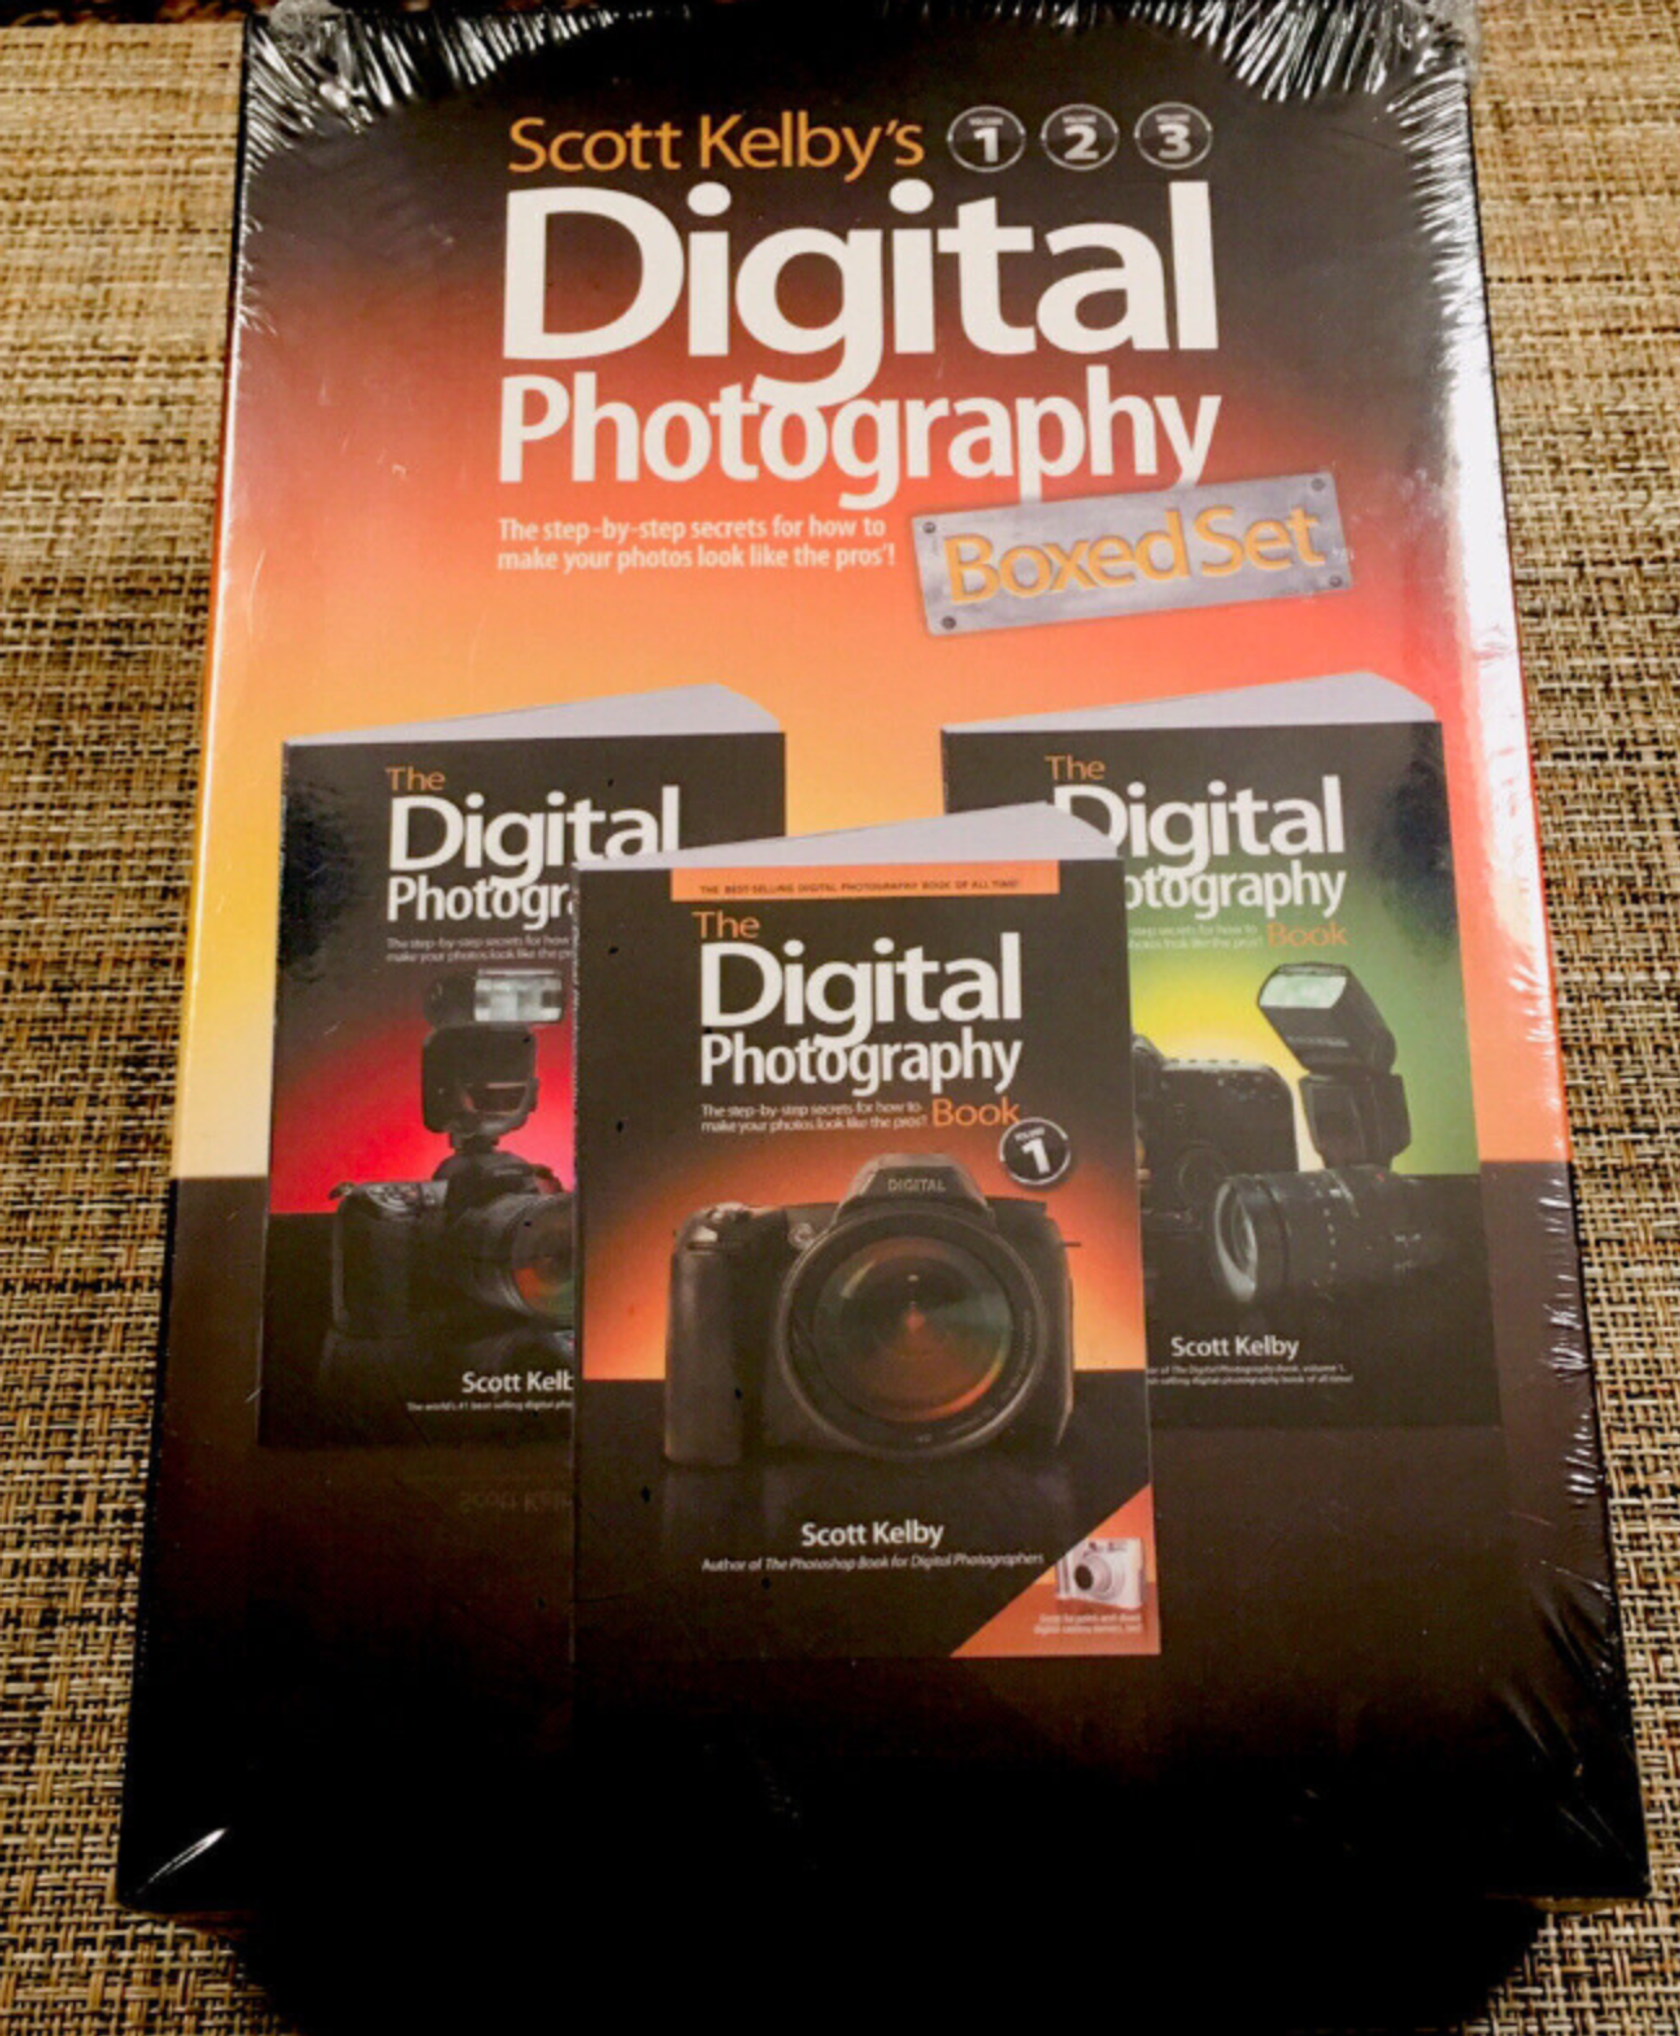 20 Best Digital Photography Books for Beginners - BookAuthority